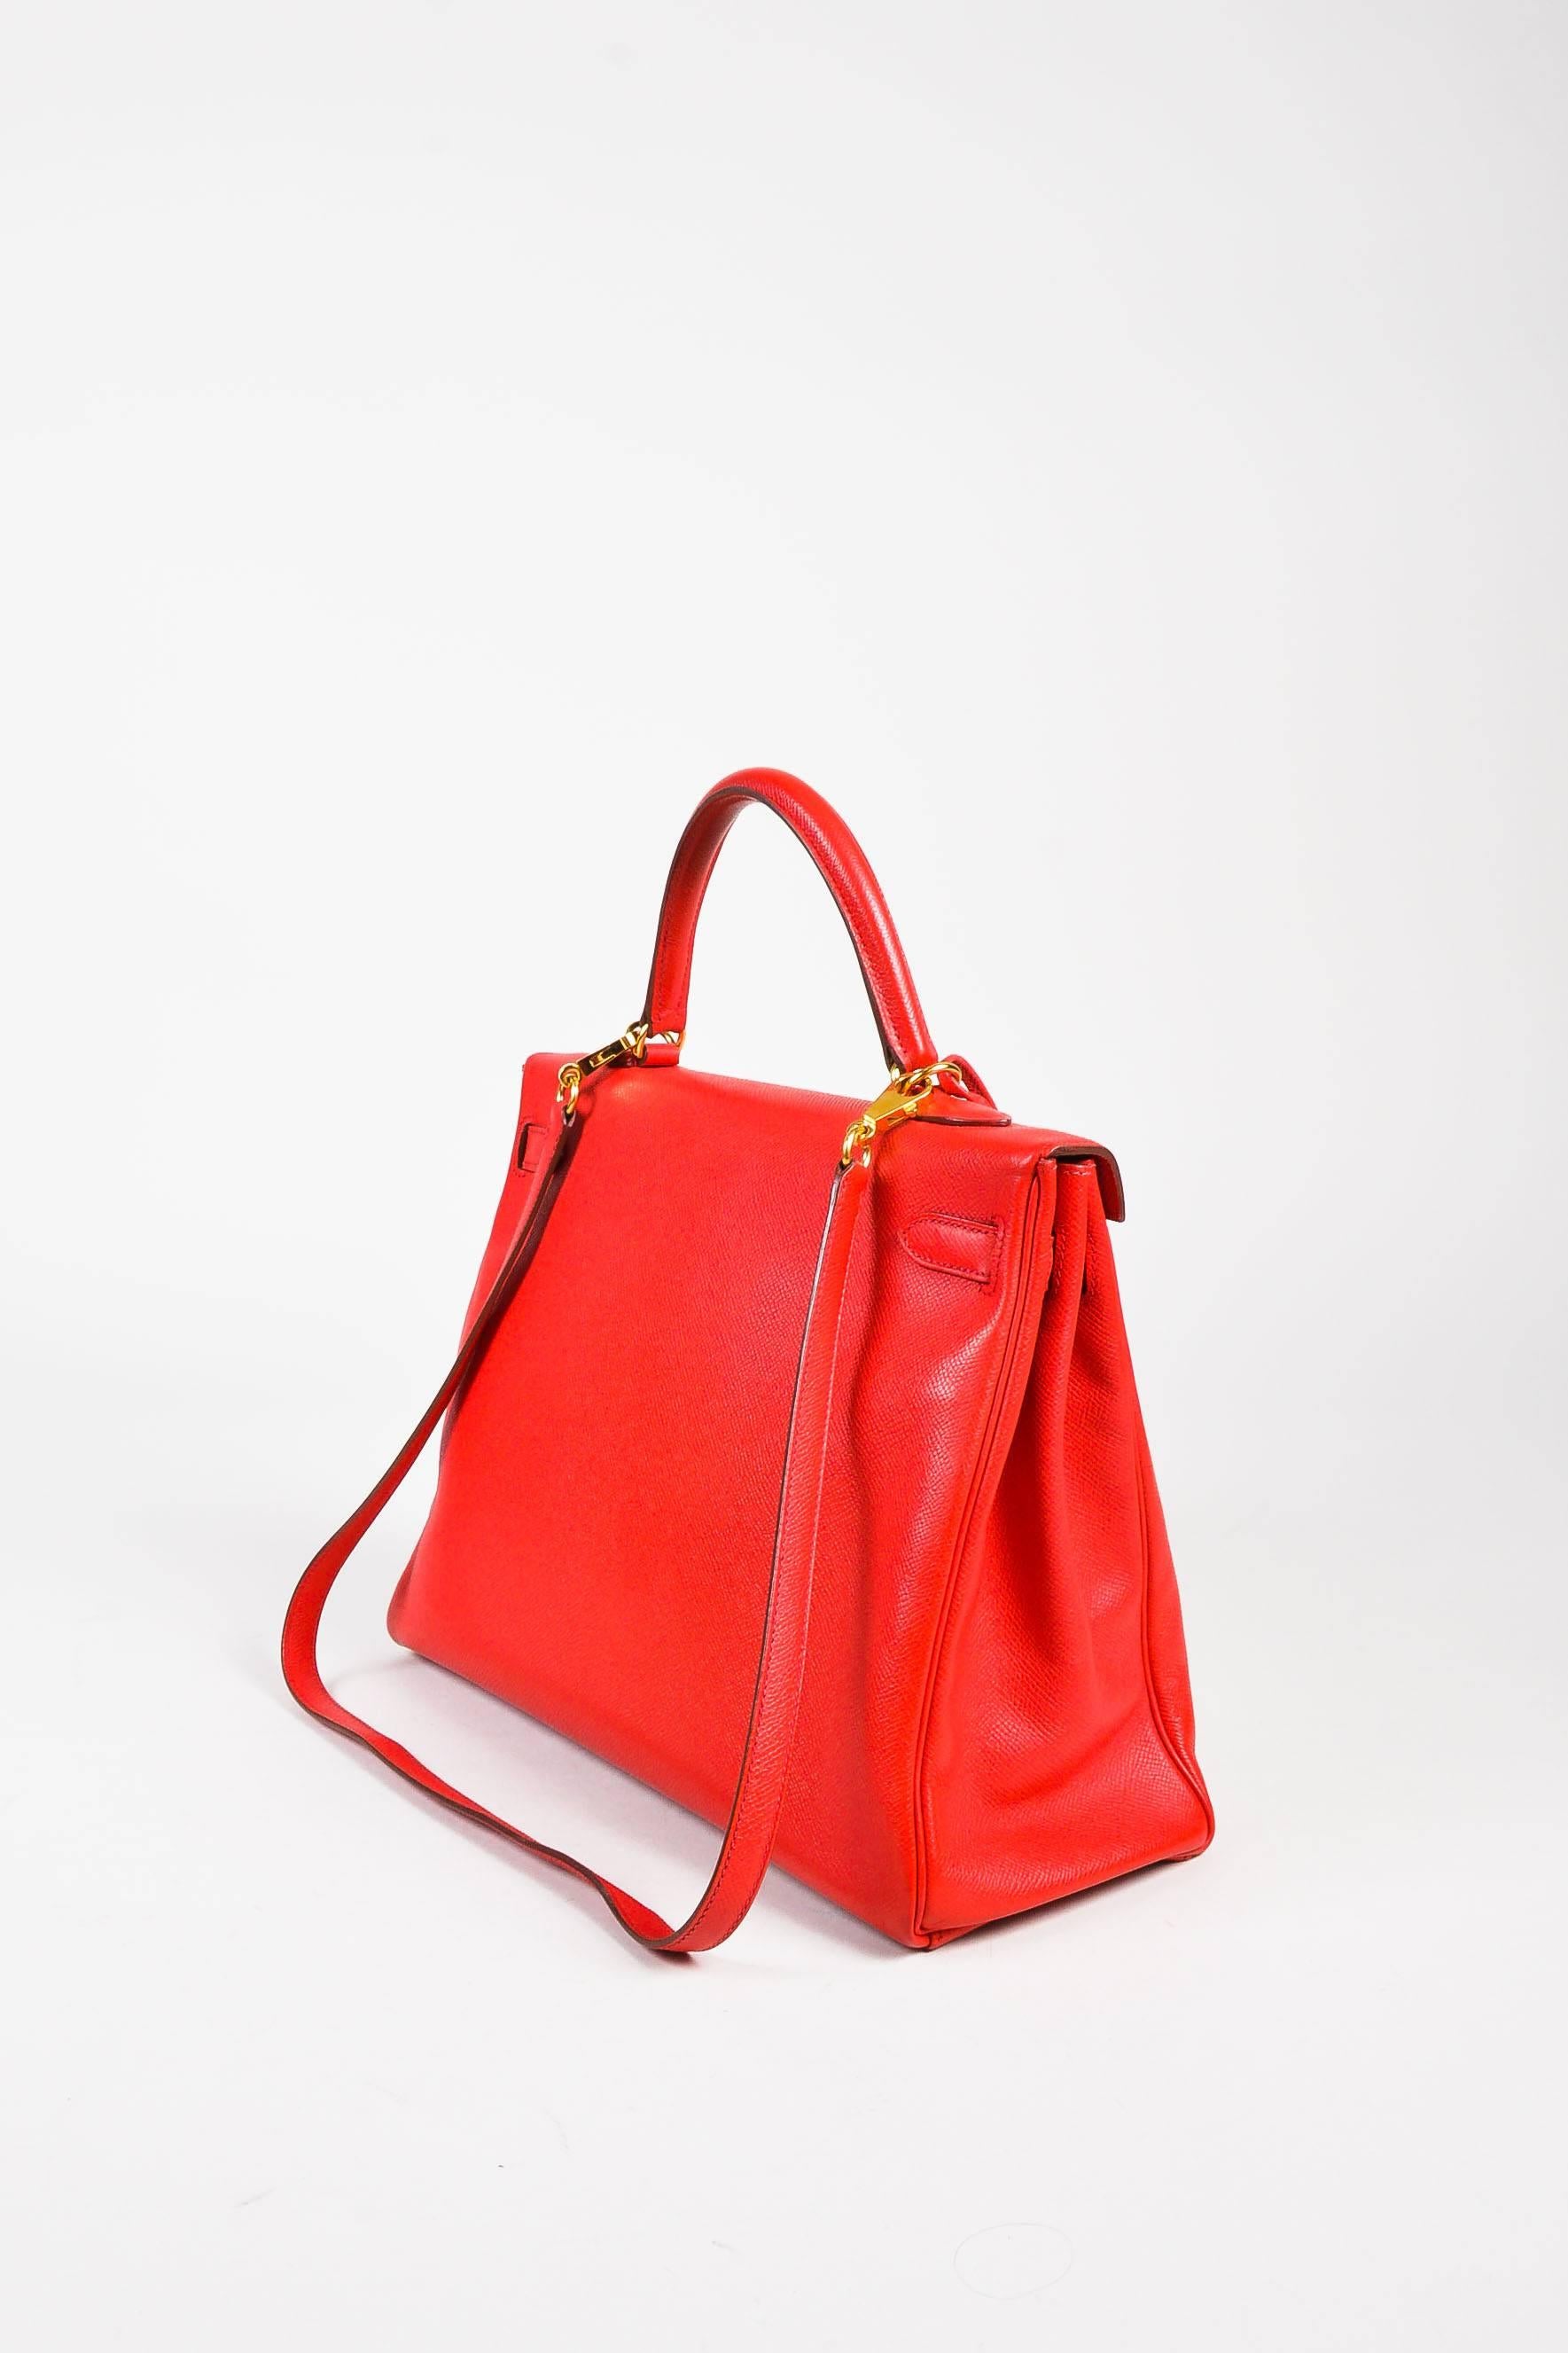 Size: 35 cm
Color: Geranium Red
Made In: France
Fabric Content: Epsom Leather

Item Specifics & Details: Circa 2009 iconic Hermes 32 cm size "Kelly" bag comes in right "geranium" red Epsom pebbled leather with gold-tone